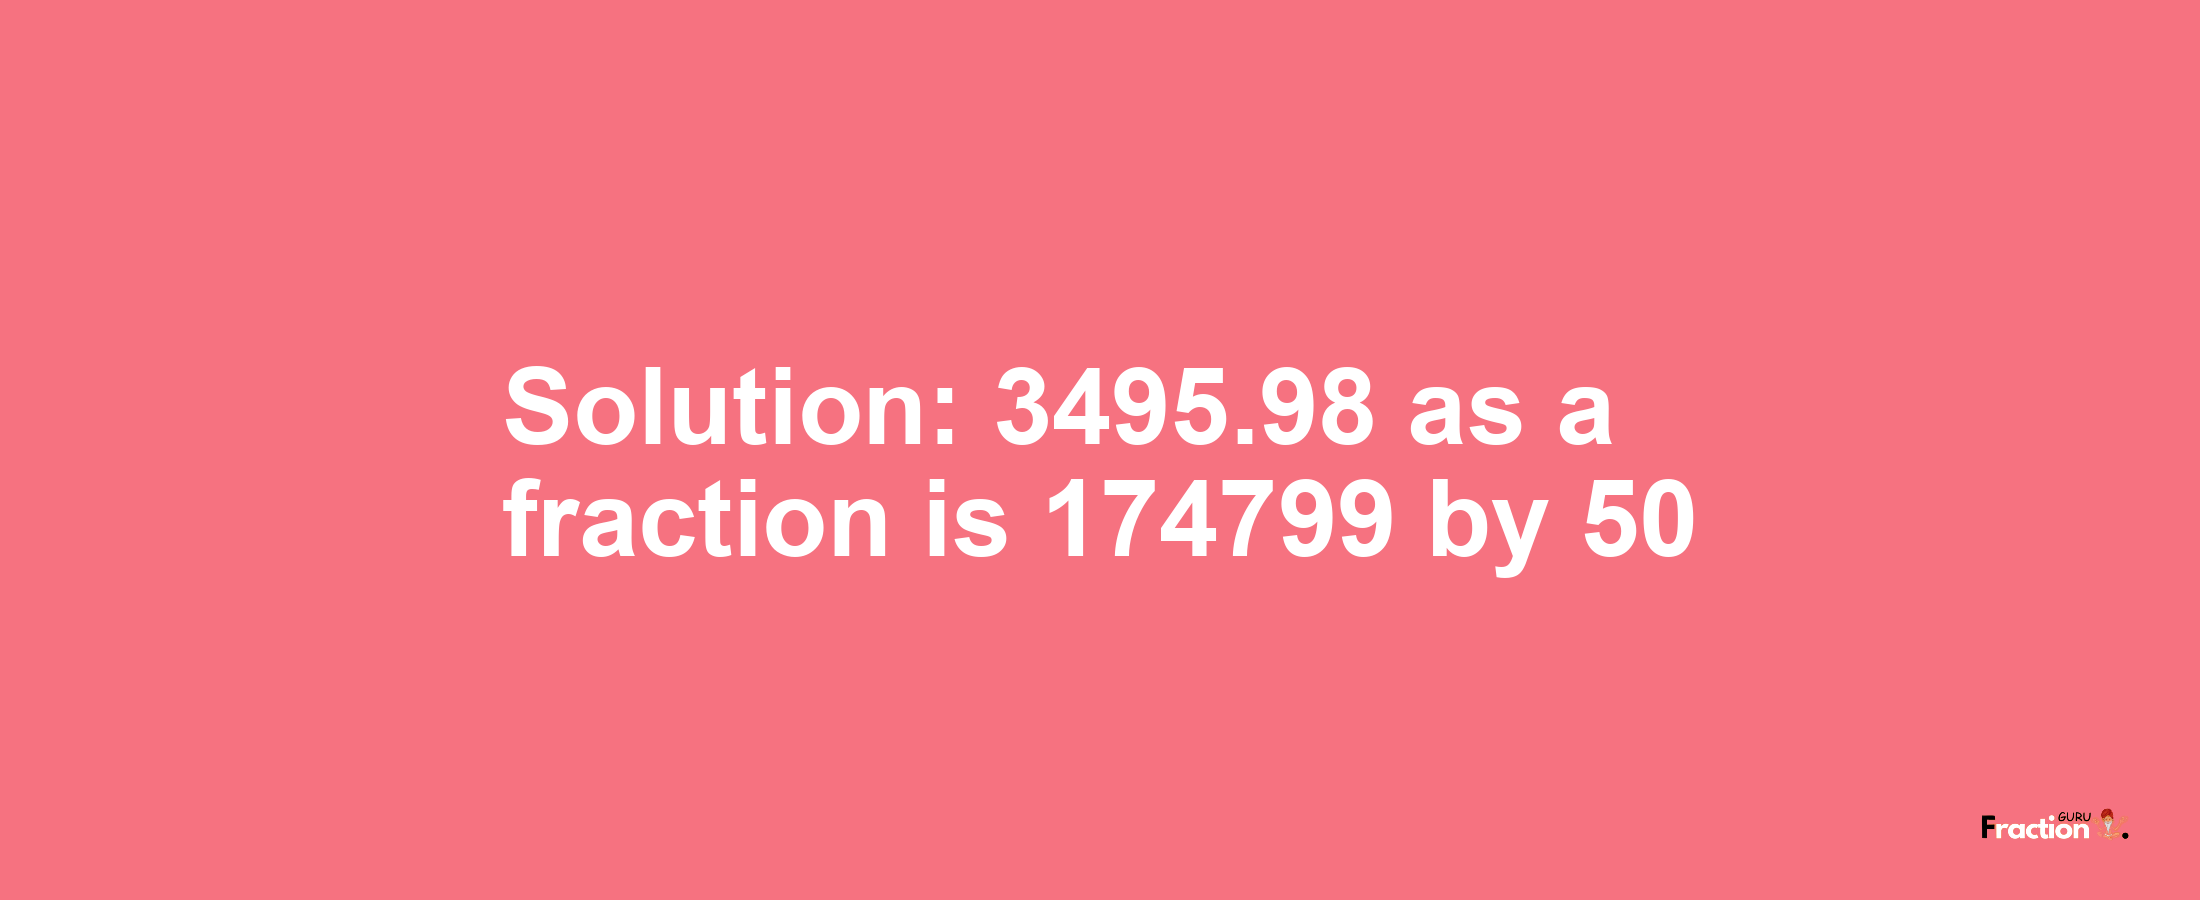 Solution:3495.98 as a fraction is 174799/50